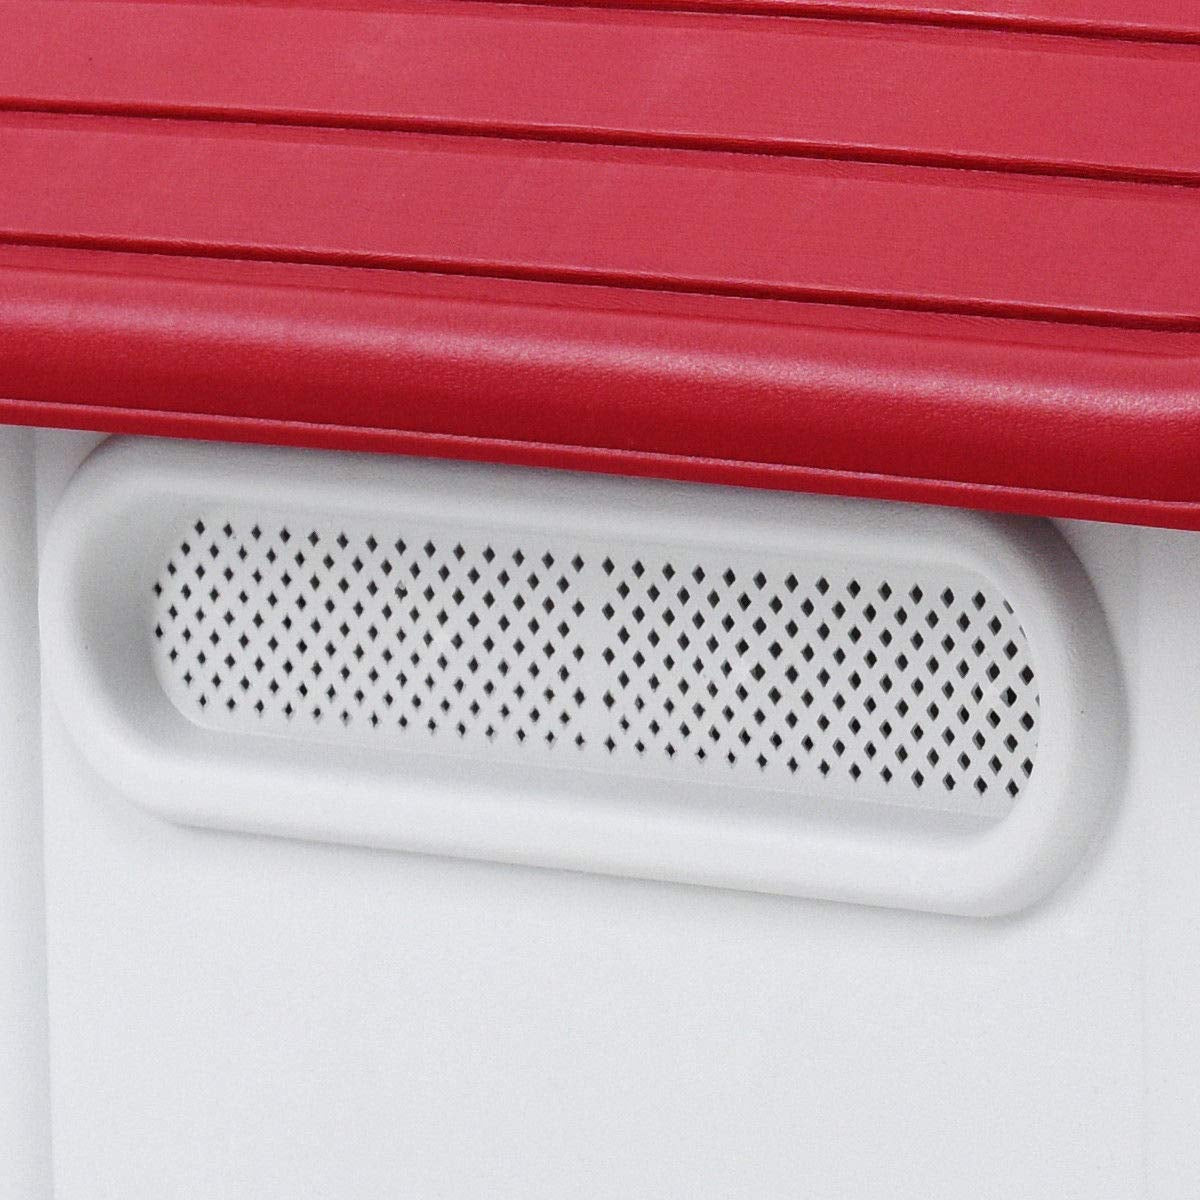 Up to 30 Lbs Waterproof Plastic Dog Cat Kennel Puppy House Outdoor Pet Shelter Red SMALL